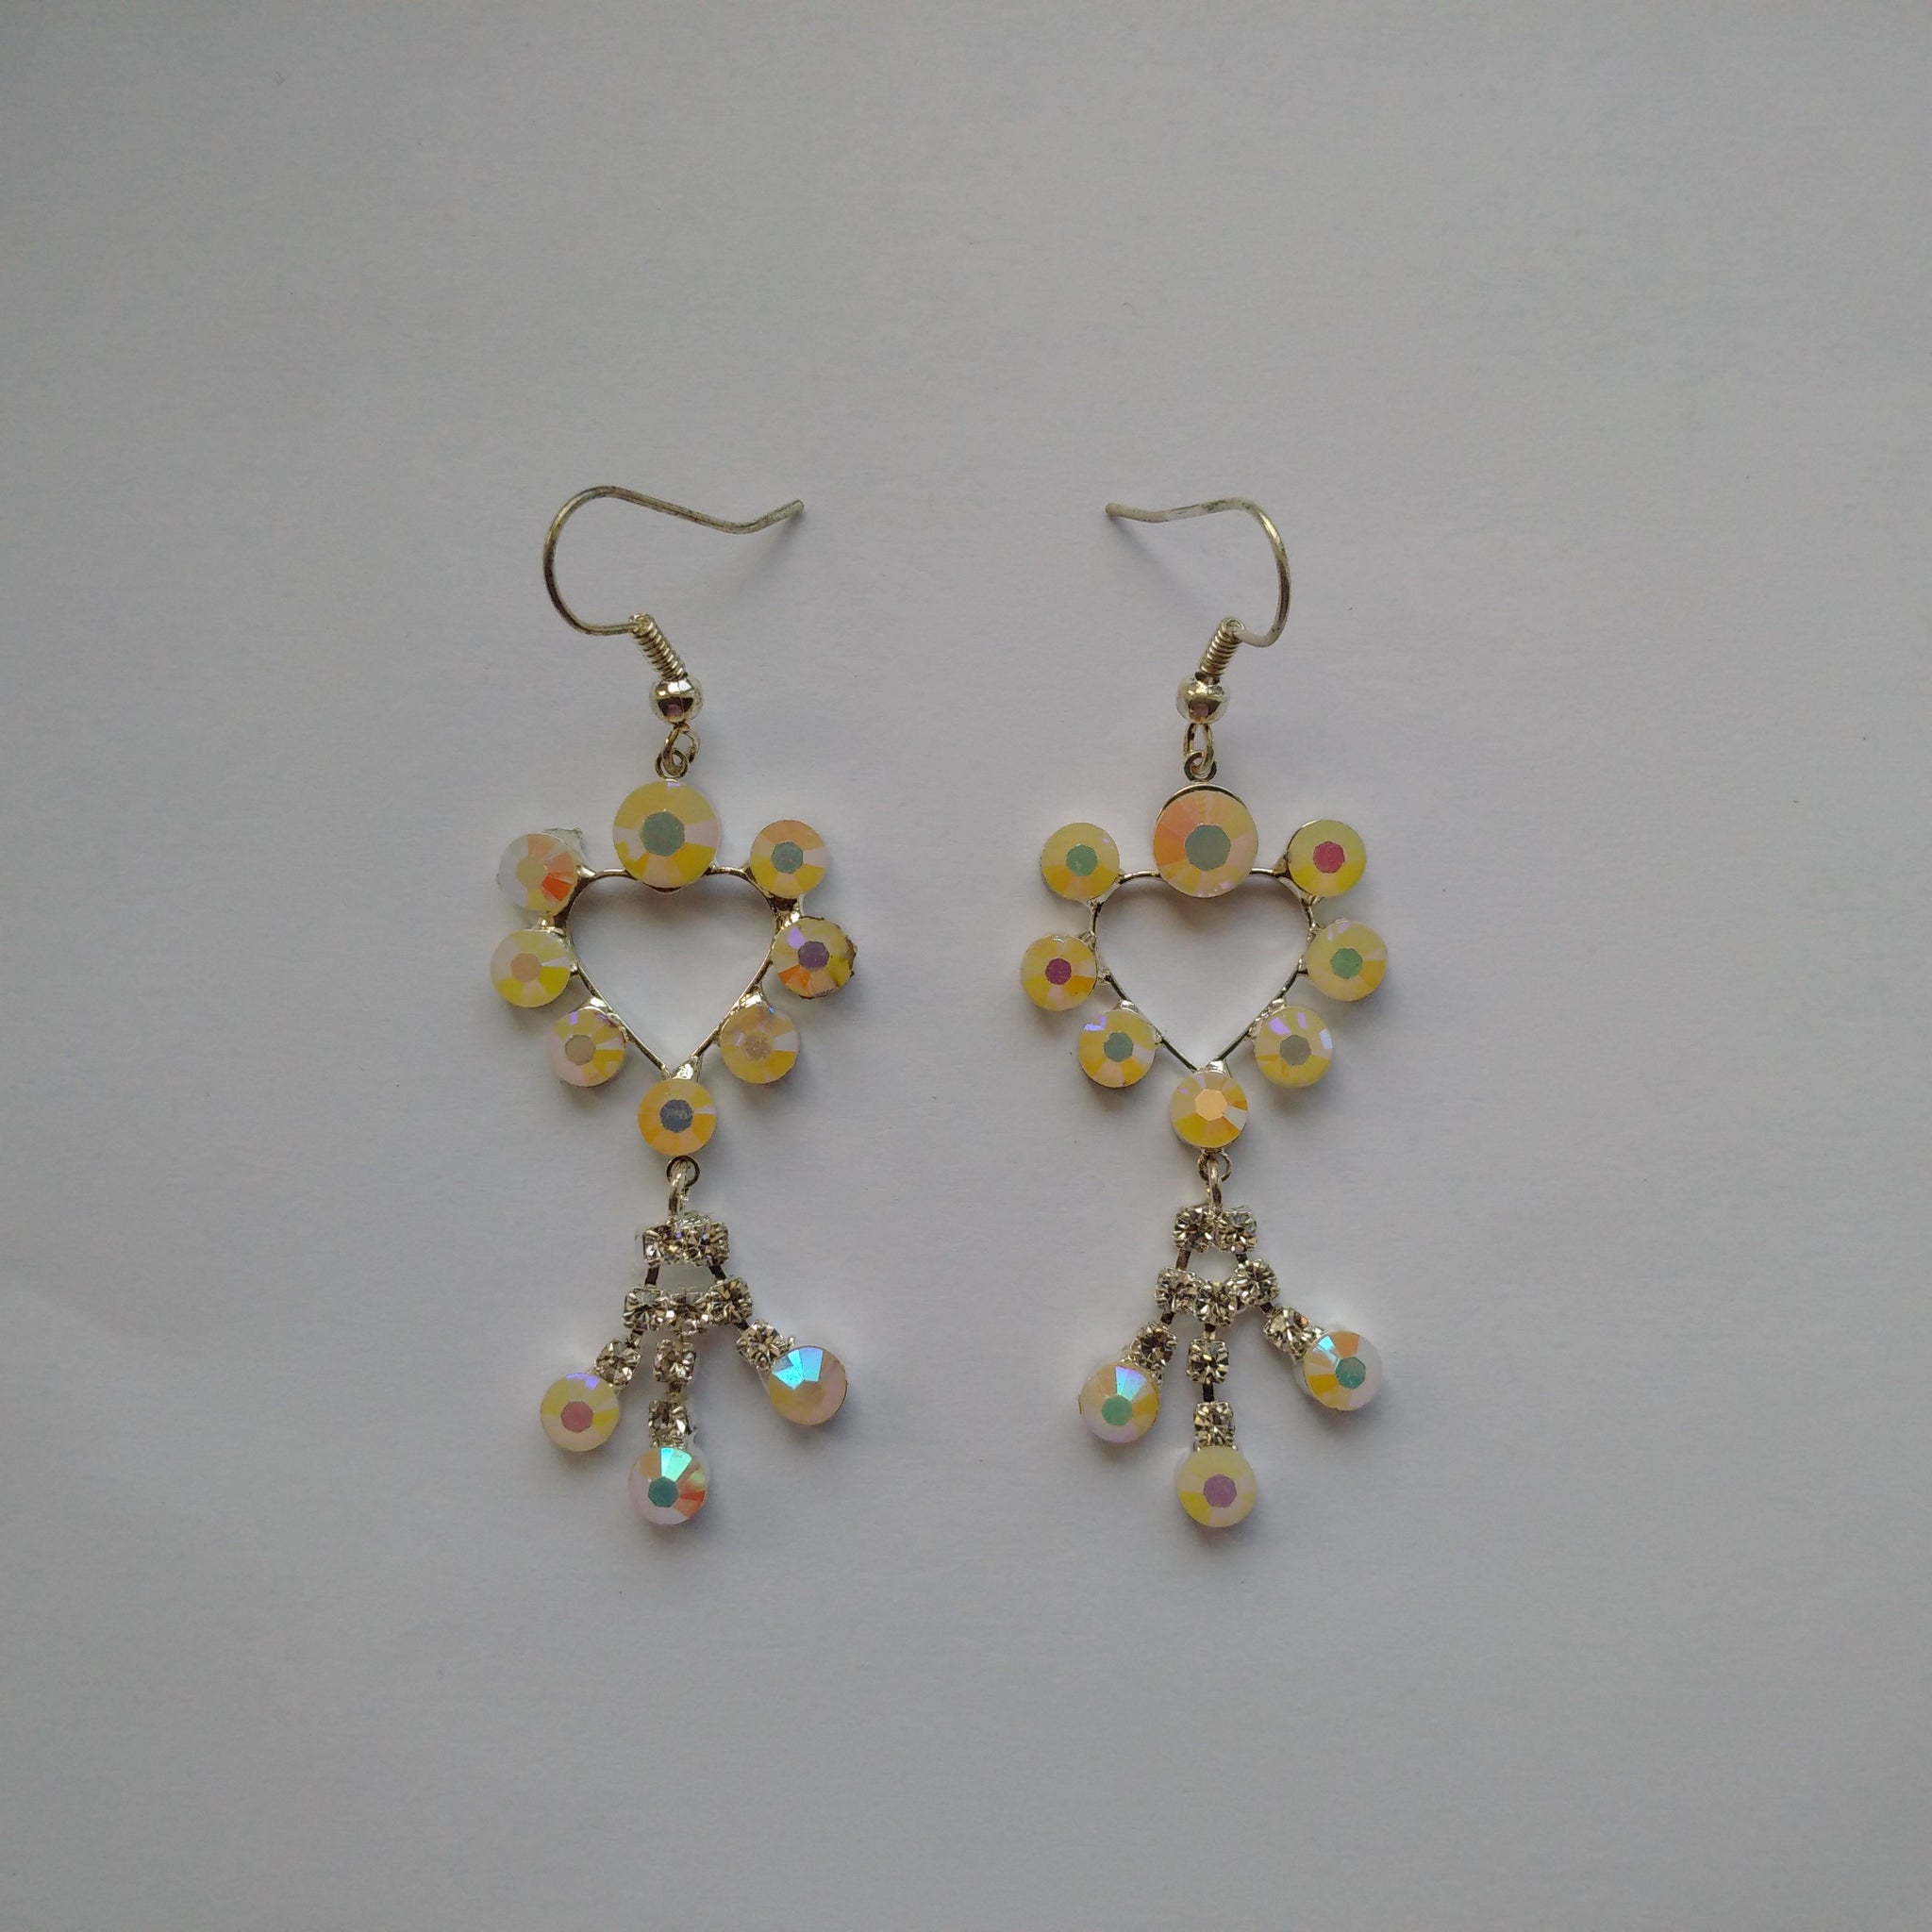 Silver Heart Shaped Earrings with Crystals & Beads - Stockpoint Apparel Outlet